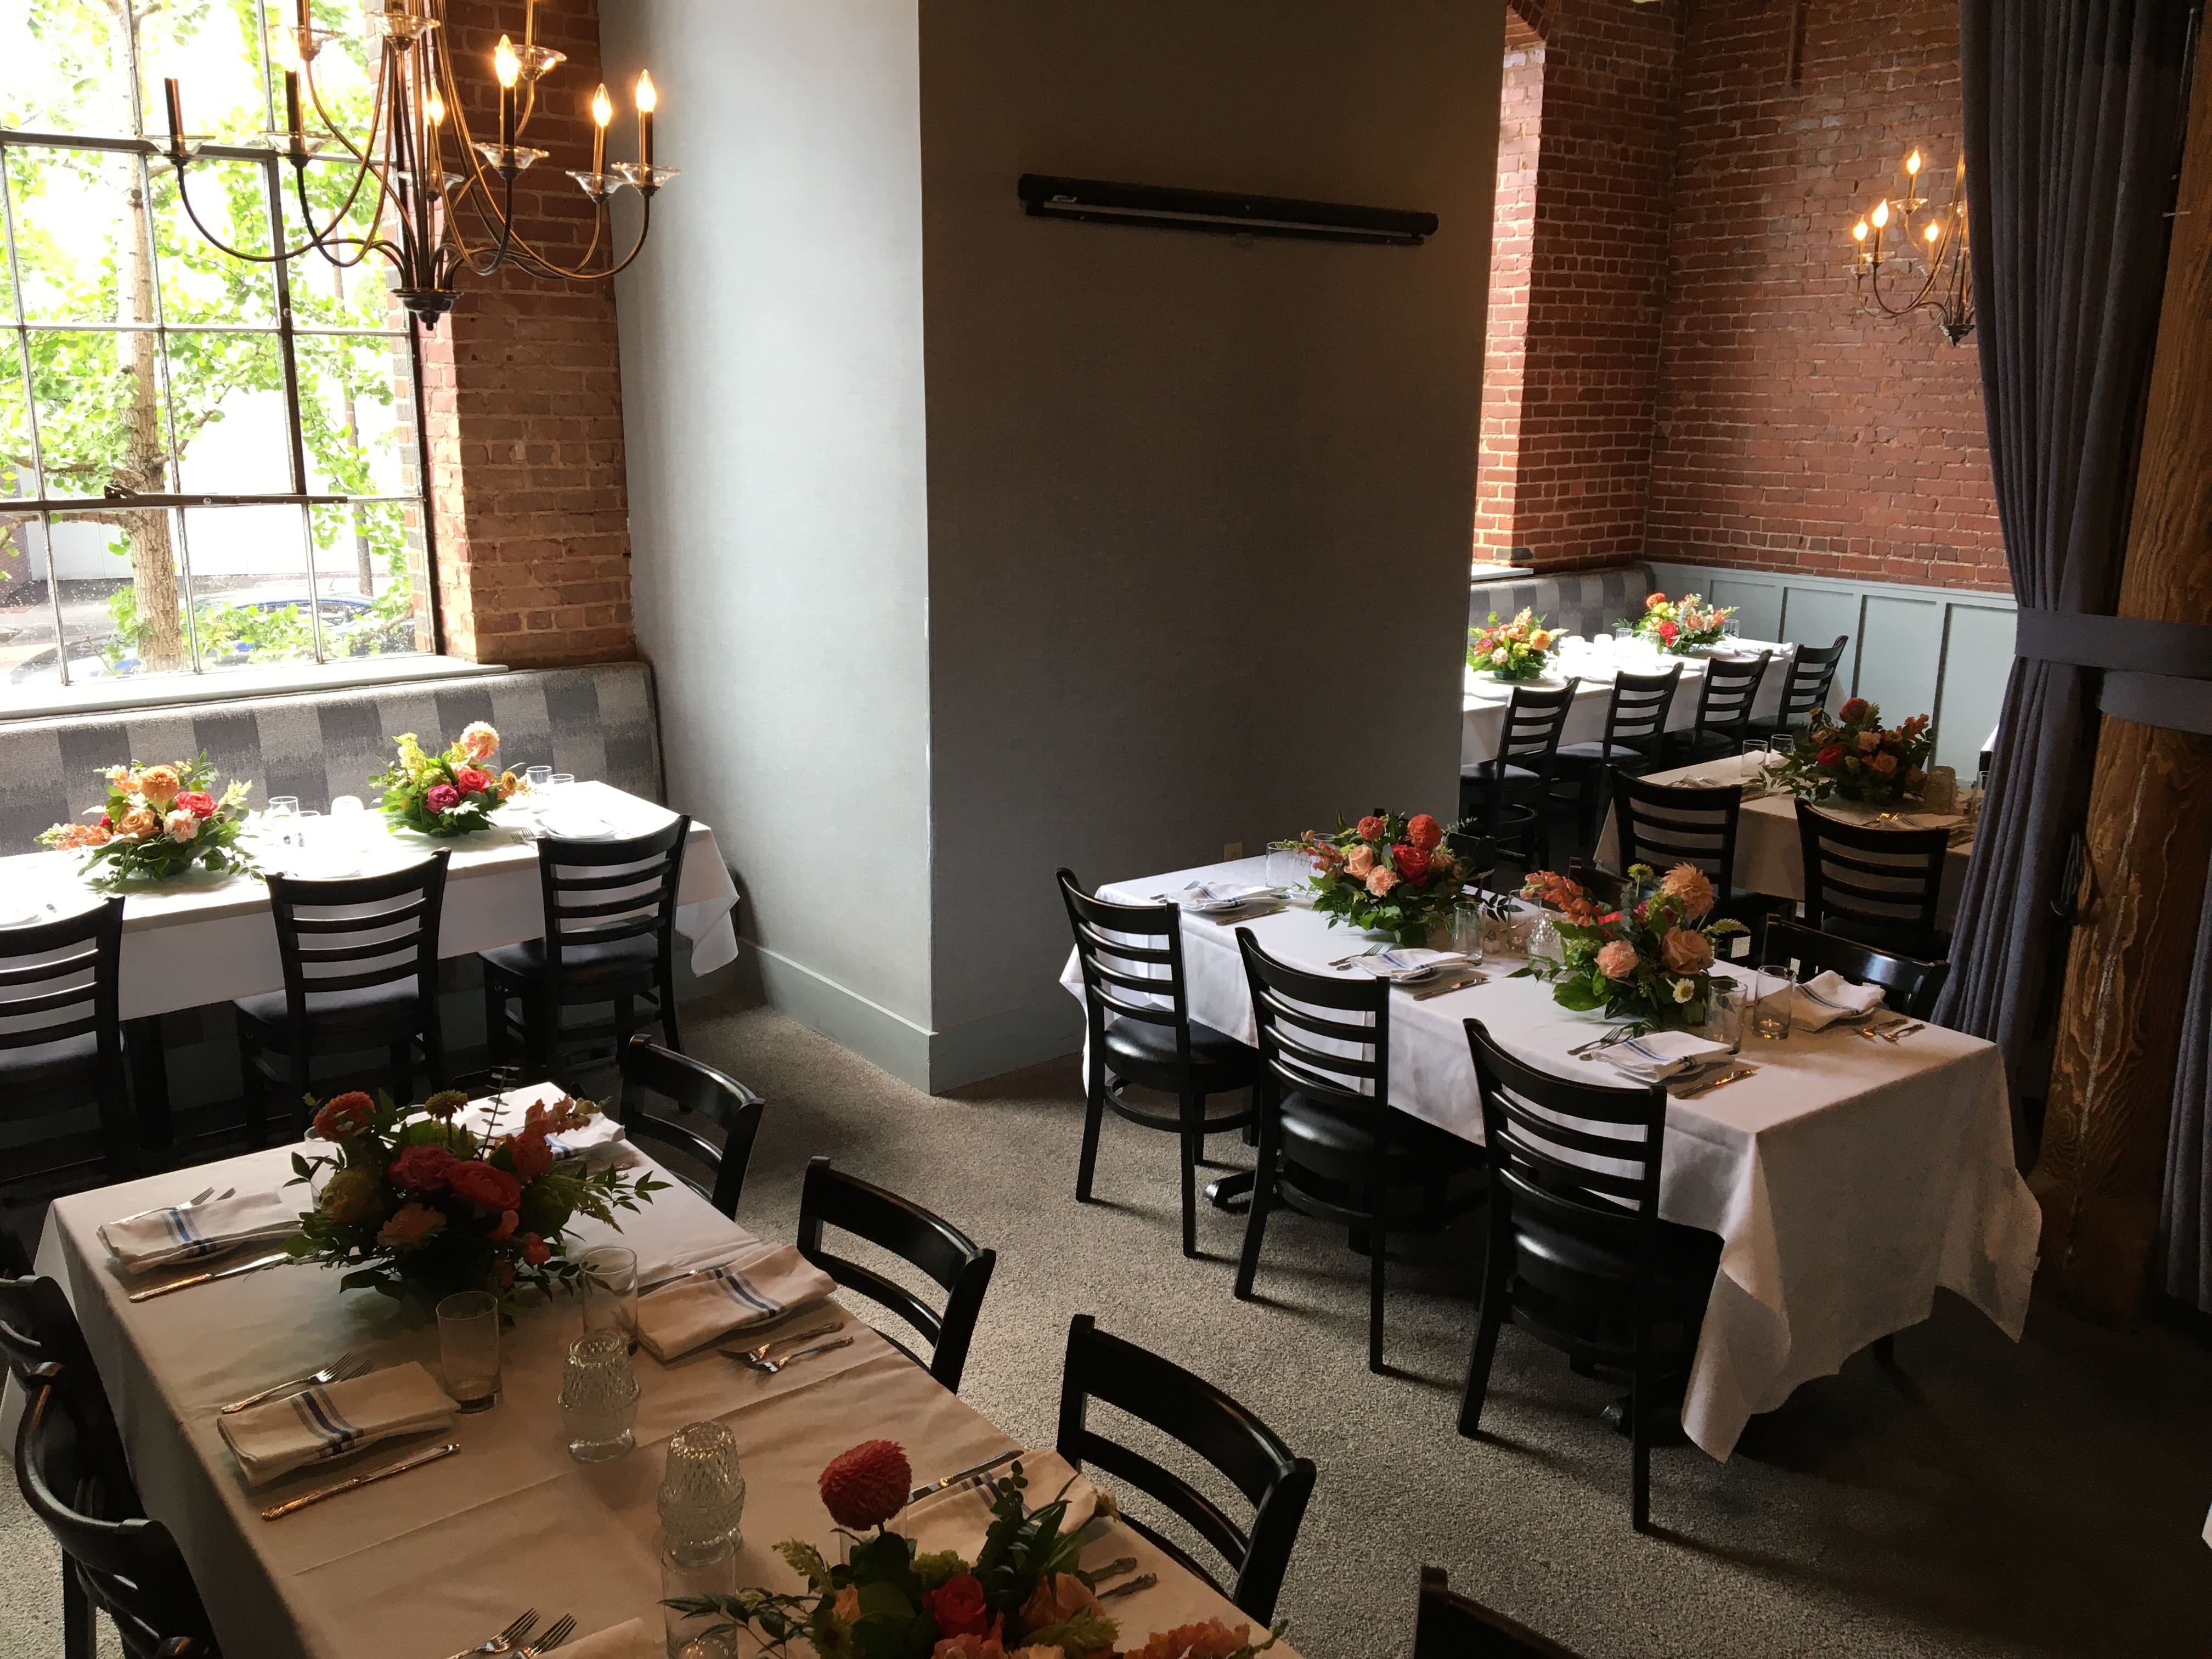 The Polo Room is a great option for event space Chattanooga.